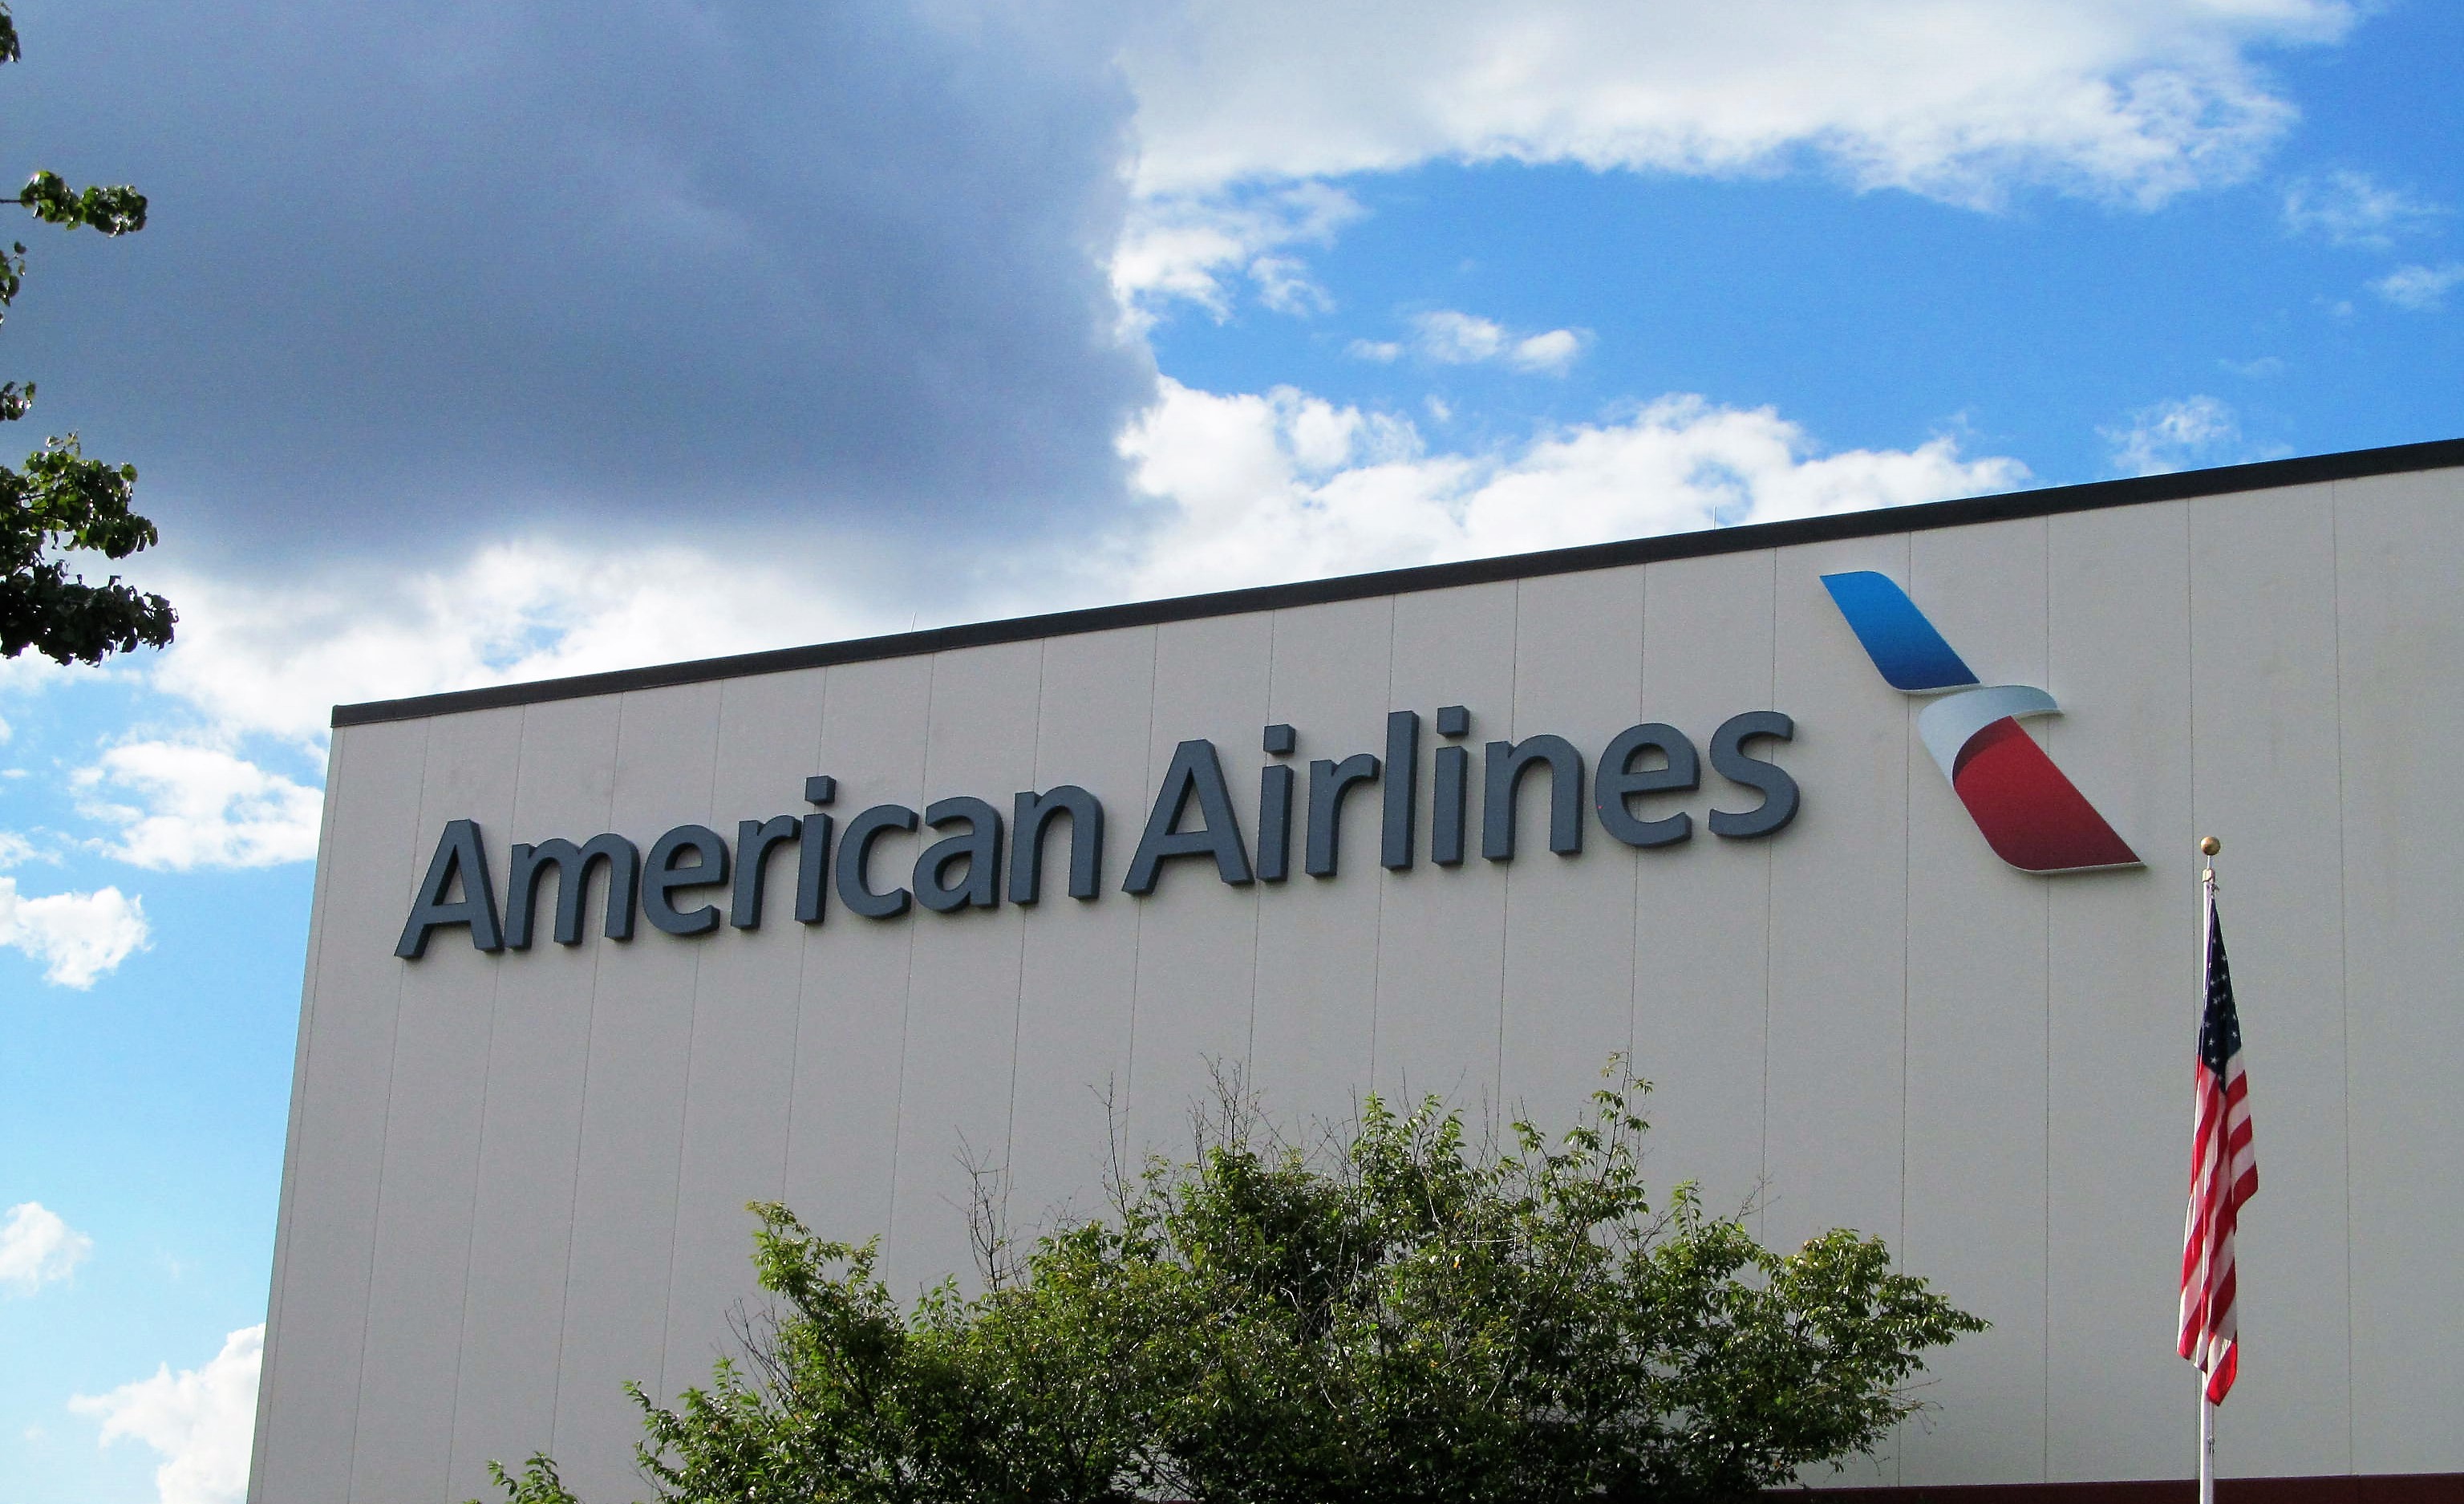 American Airlines Signage - Signage , HD Wallpaper & Backgrounds